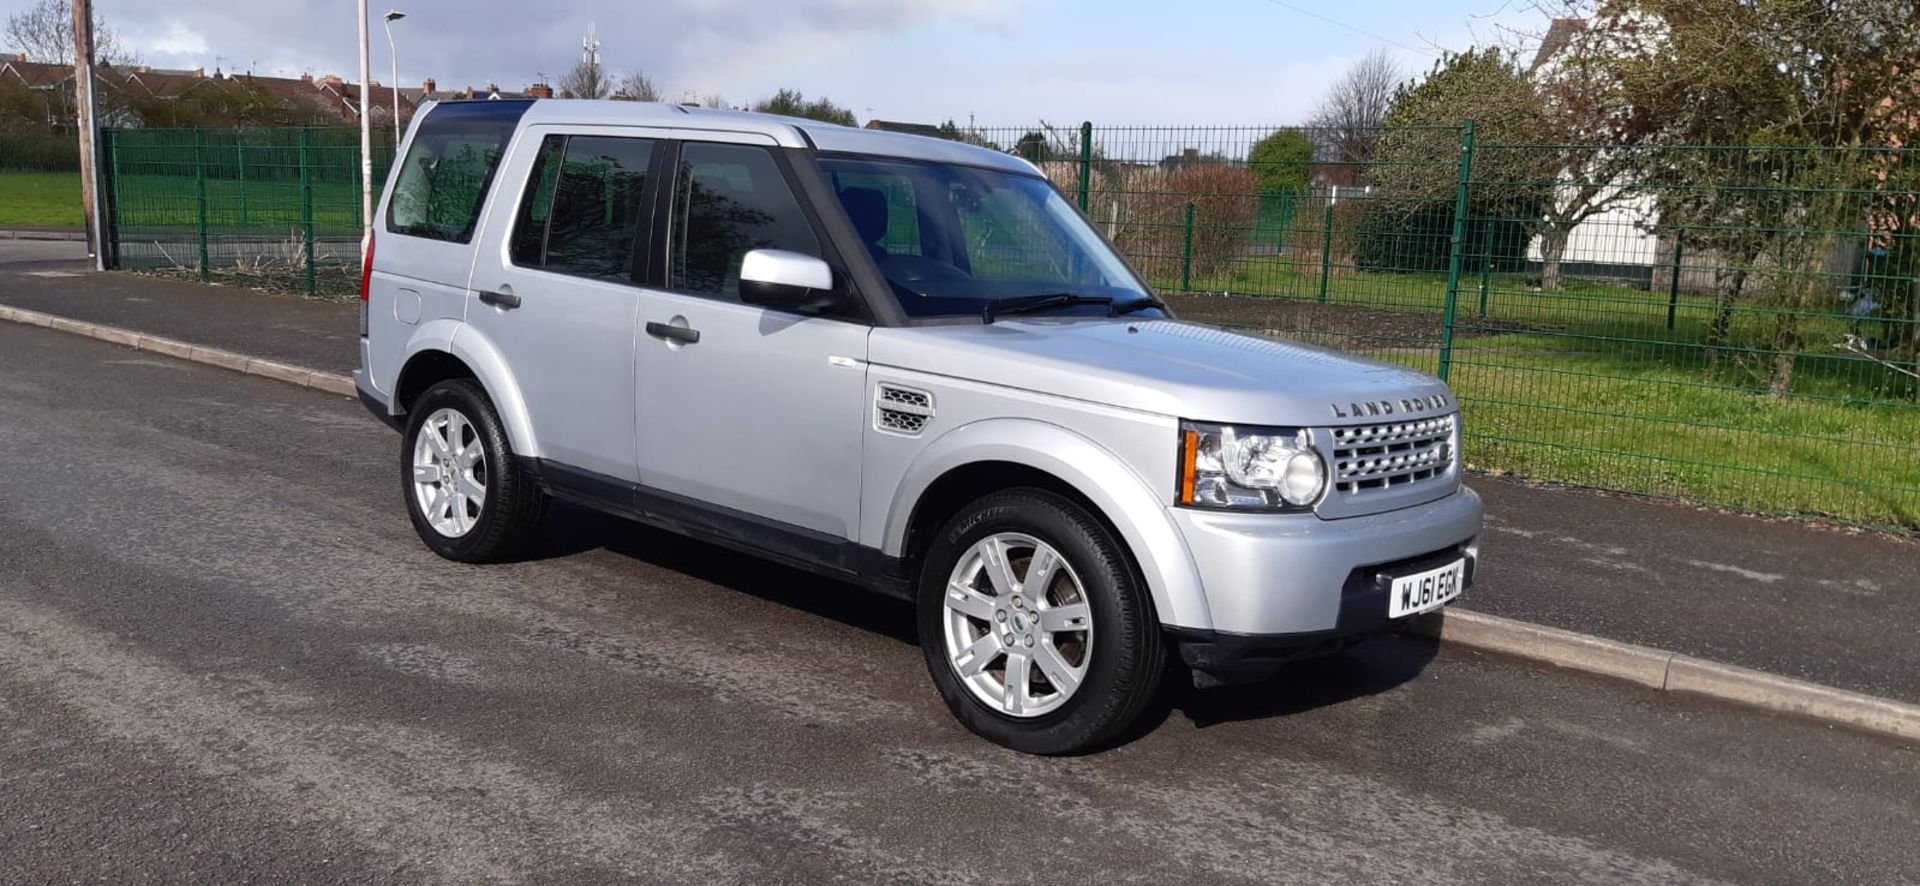 2011 LAND ROVER DISCOVERY GS SDV6 AUTO 7 SEATER SILVER *NO VAT*